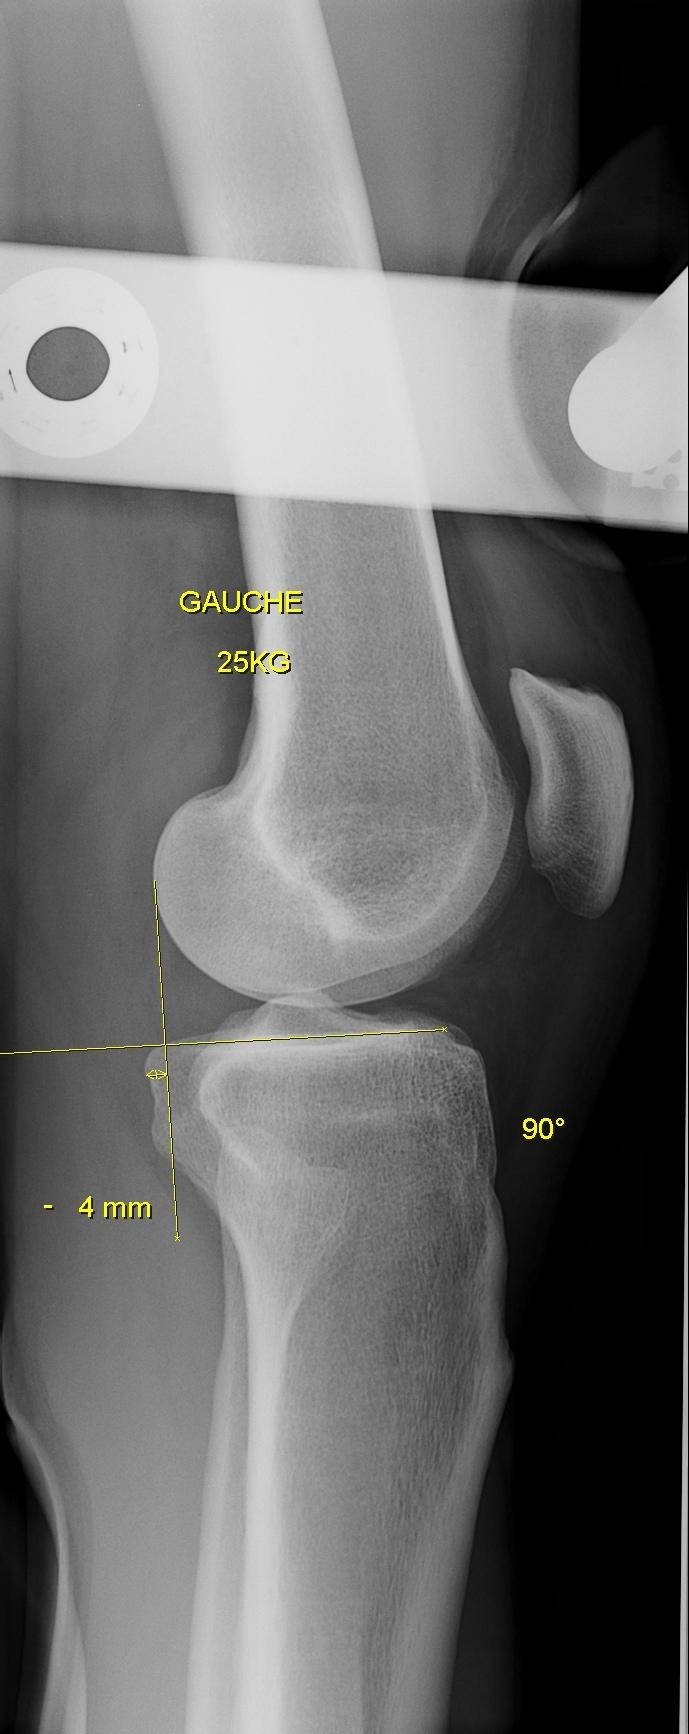 Ligamentaire.